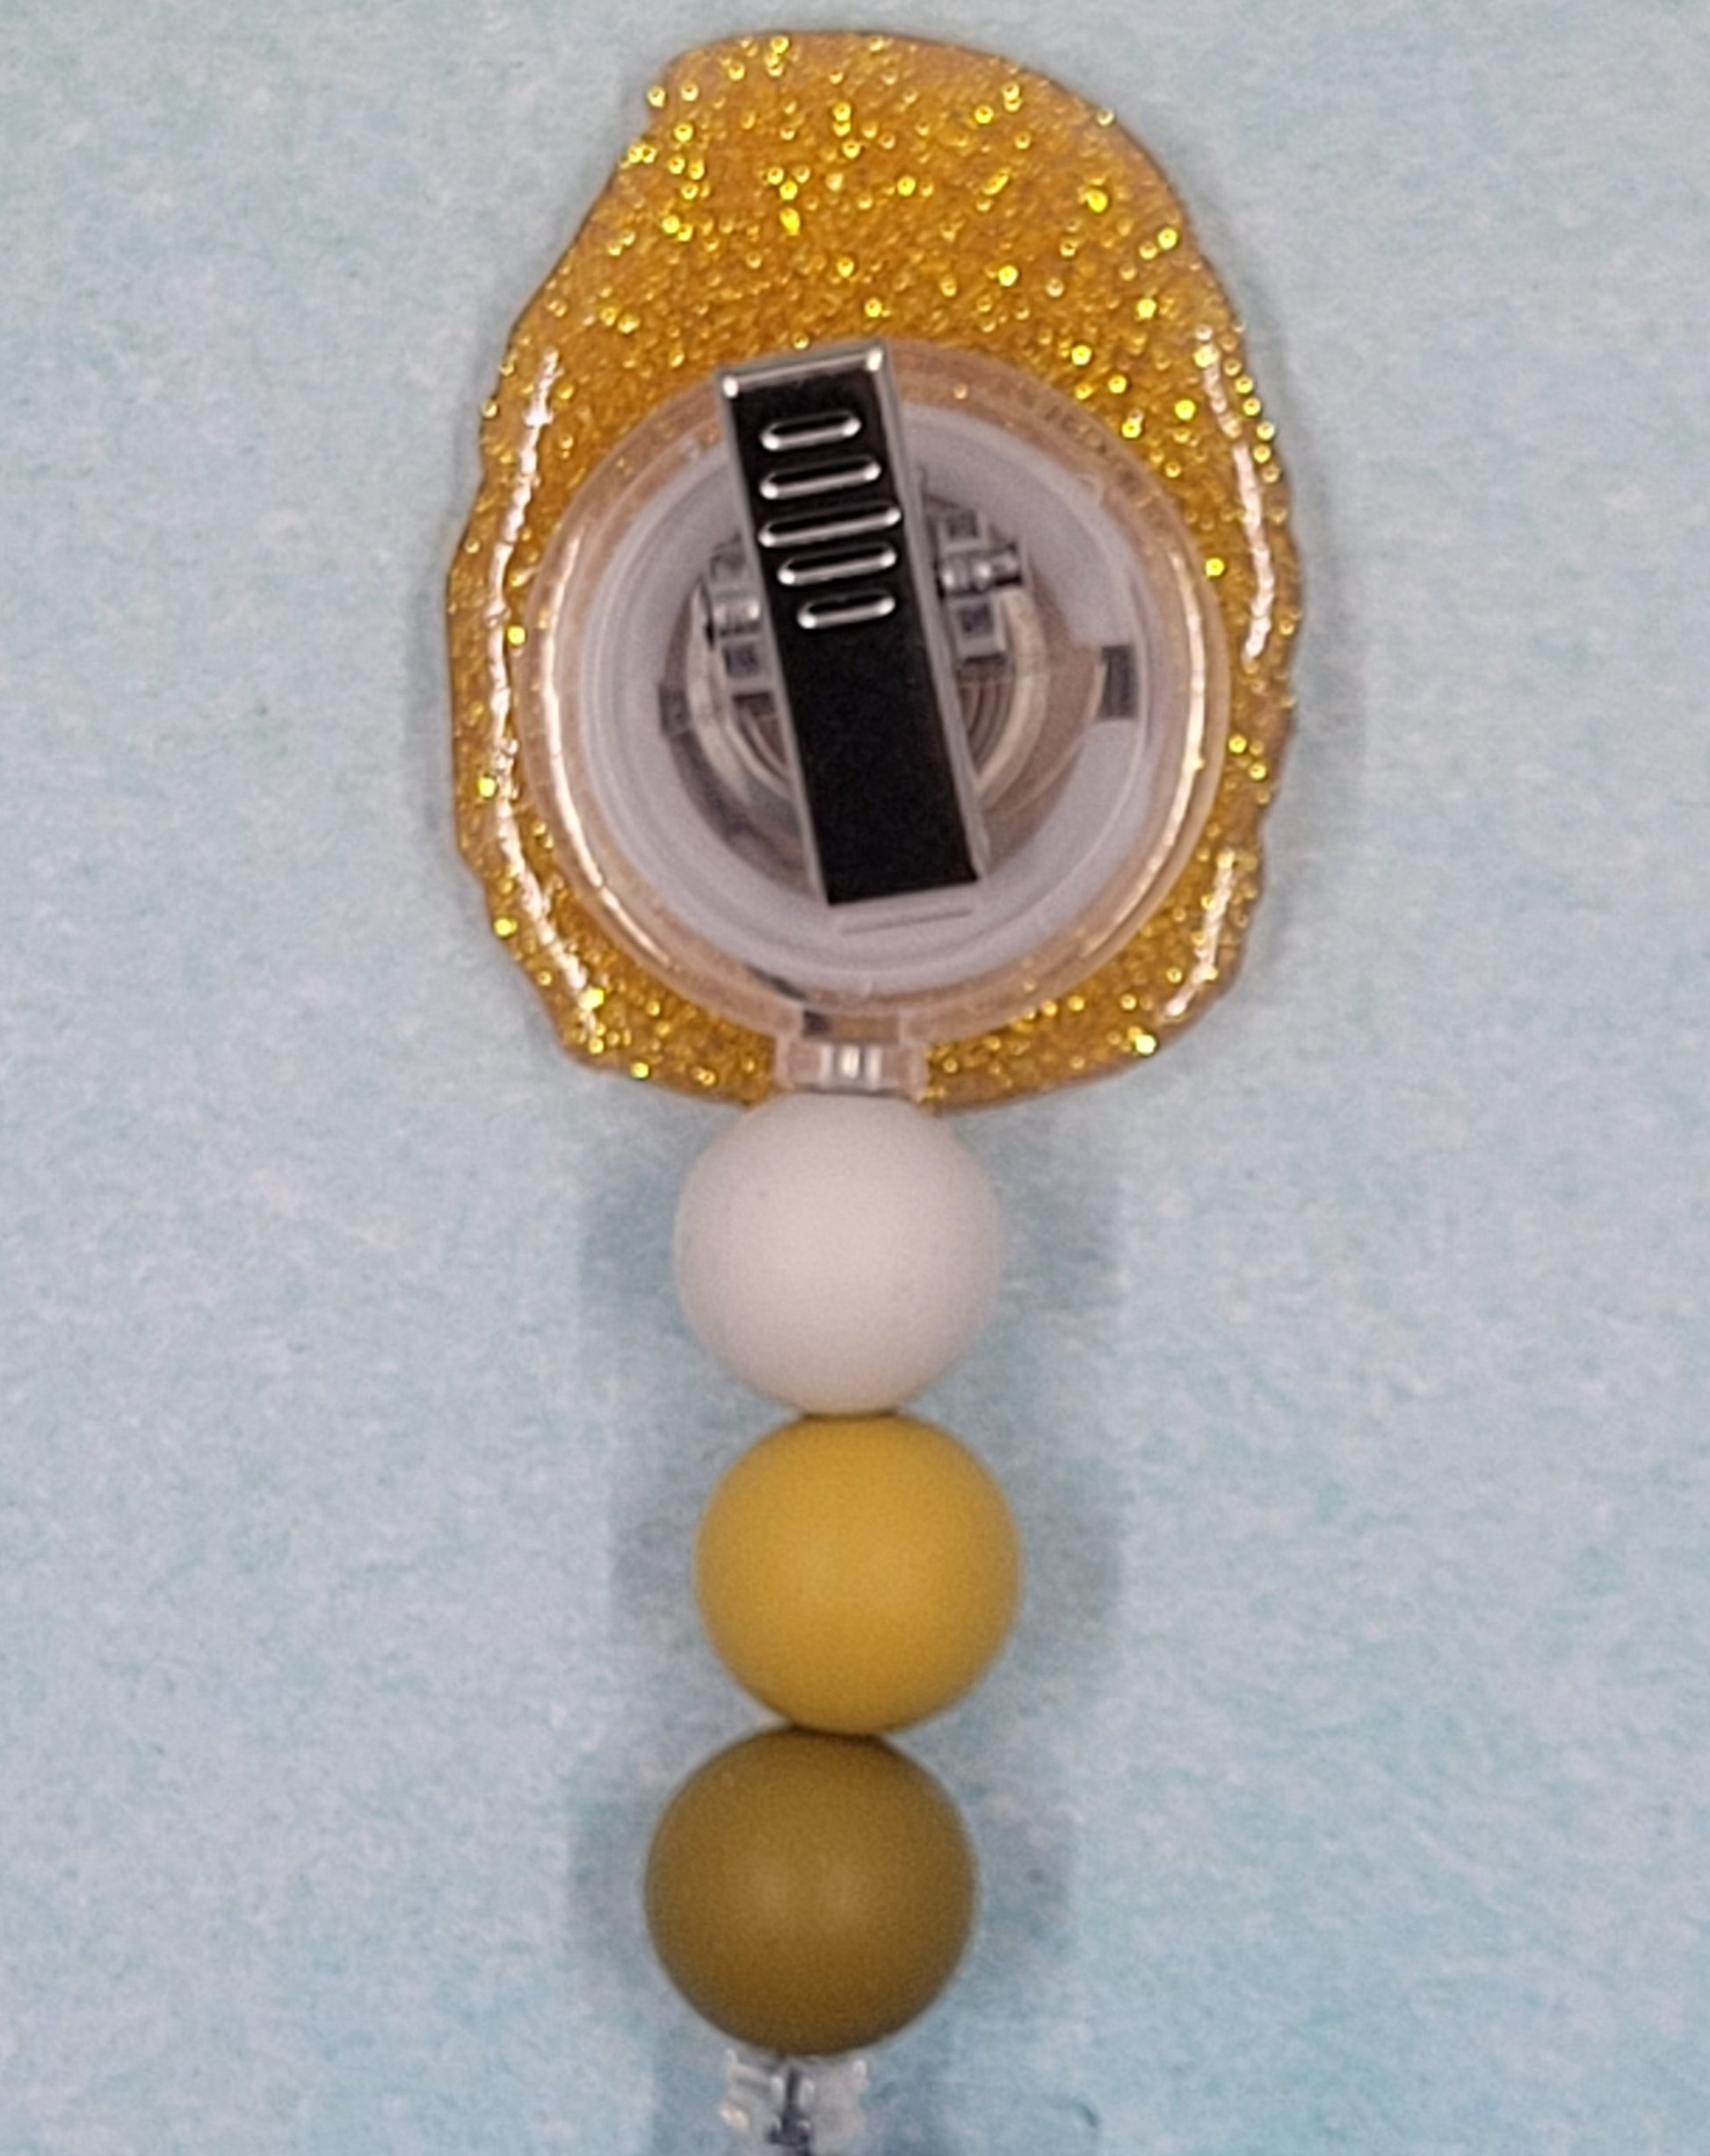 Nug Life! Only thing missing is your dipping sauce. This Chicken Nugget Badge Reel looks good enough to eat. Looks like someone already snuck a bite. Golden brown in color with matching glitter background, 3 color coordinated beads finish this tasty treat.